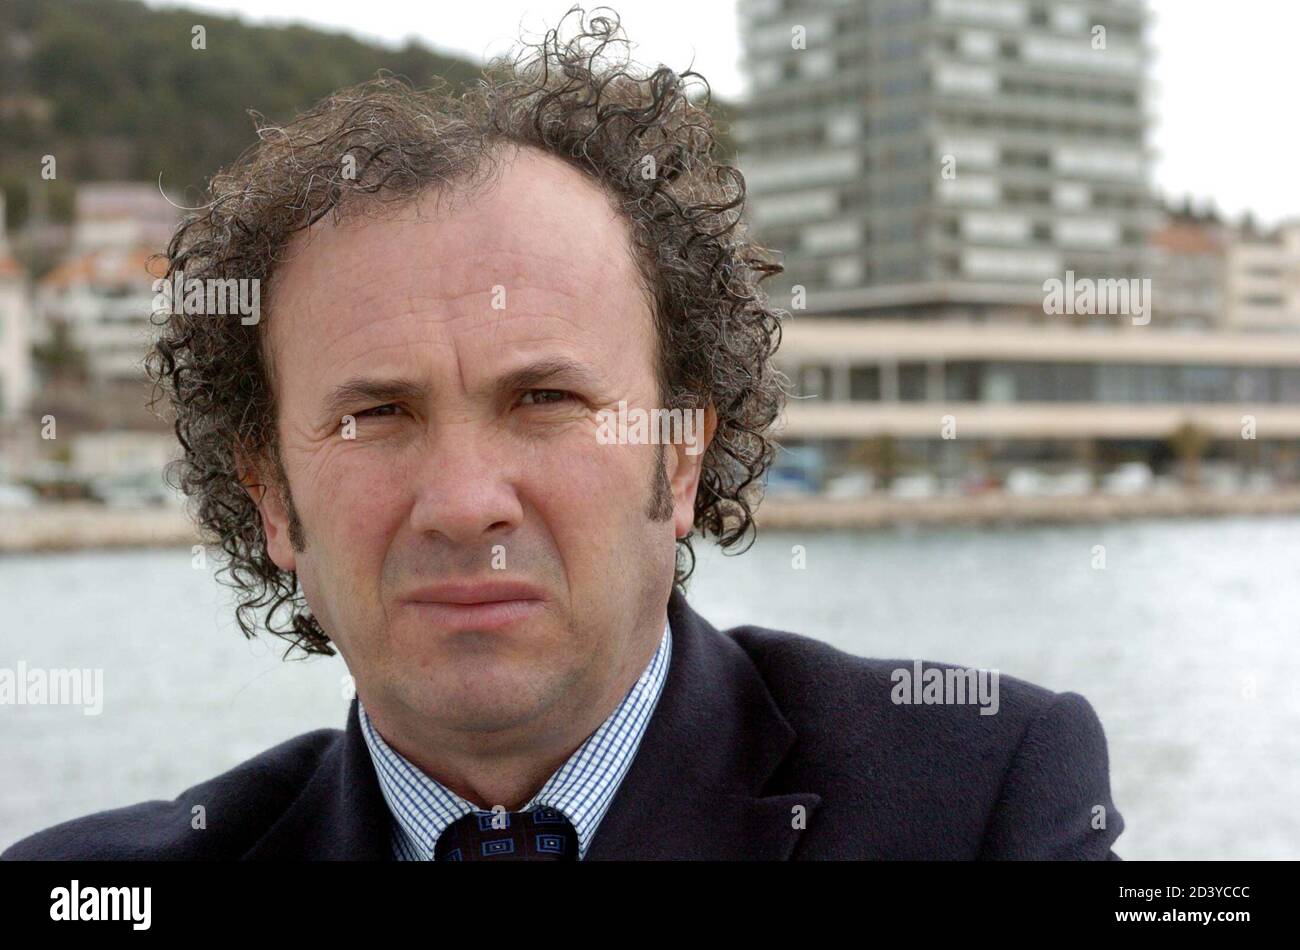 Croatian trade and tourism magnate Zeljko Kerum stands in front of a major  hotel in his native southern Adriatic city of Split, Croatia. Croatian  trade and tourism magnate Zeljko Kerum stands in